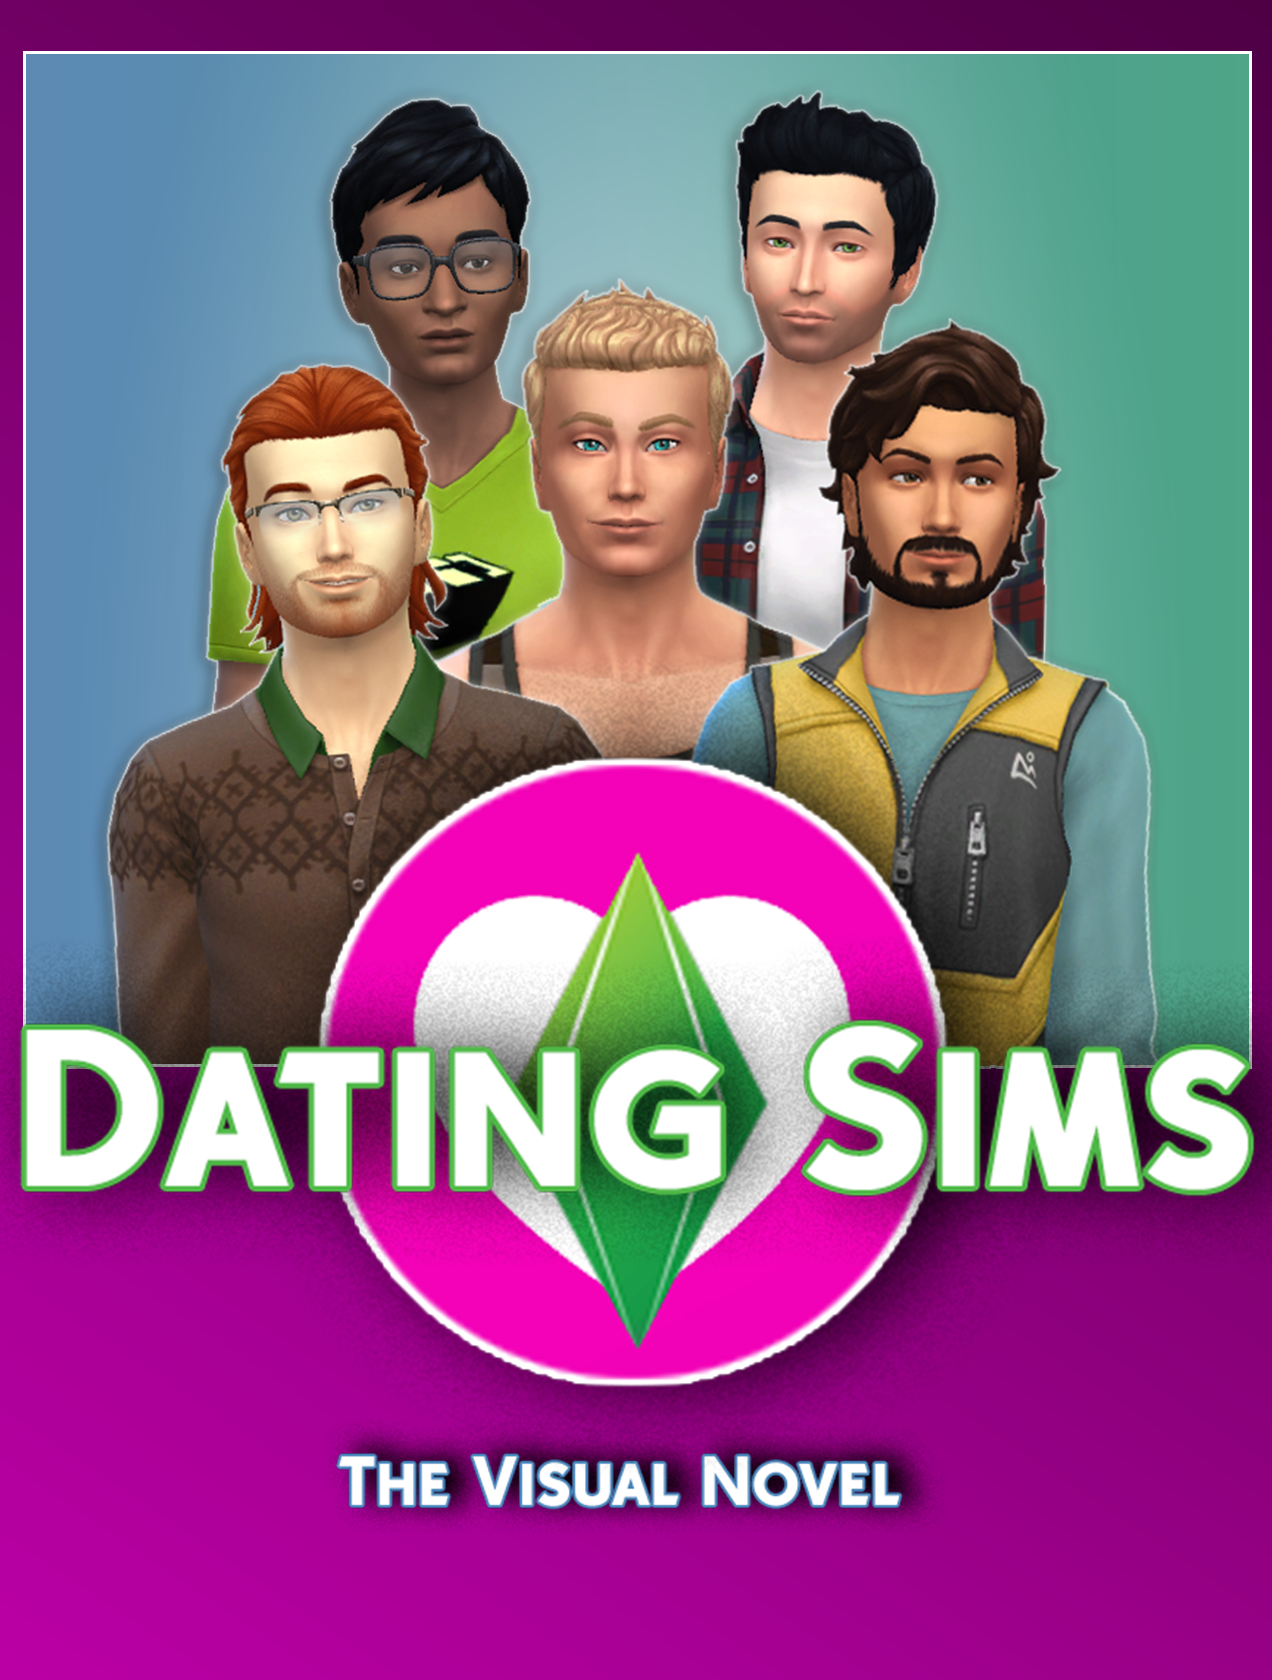 indie dating Sims over 40 skilt dating